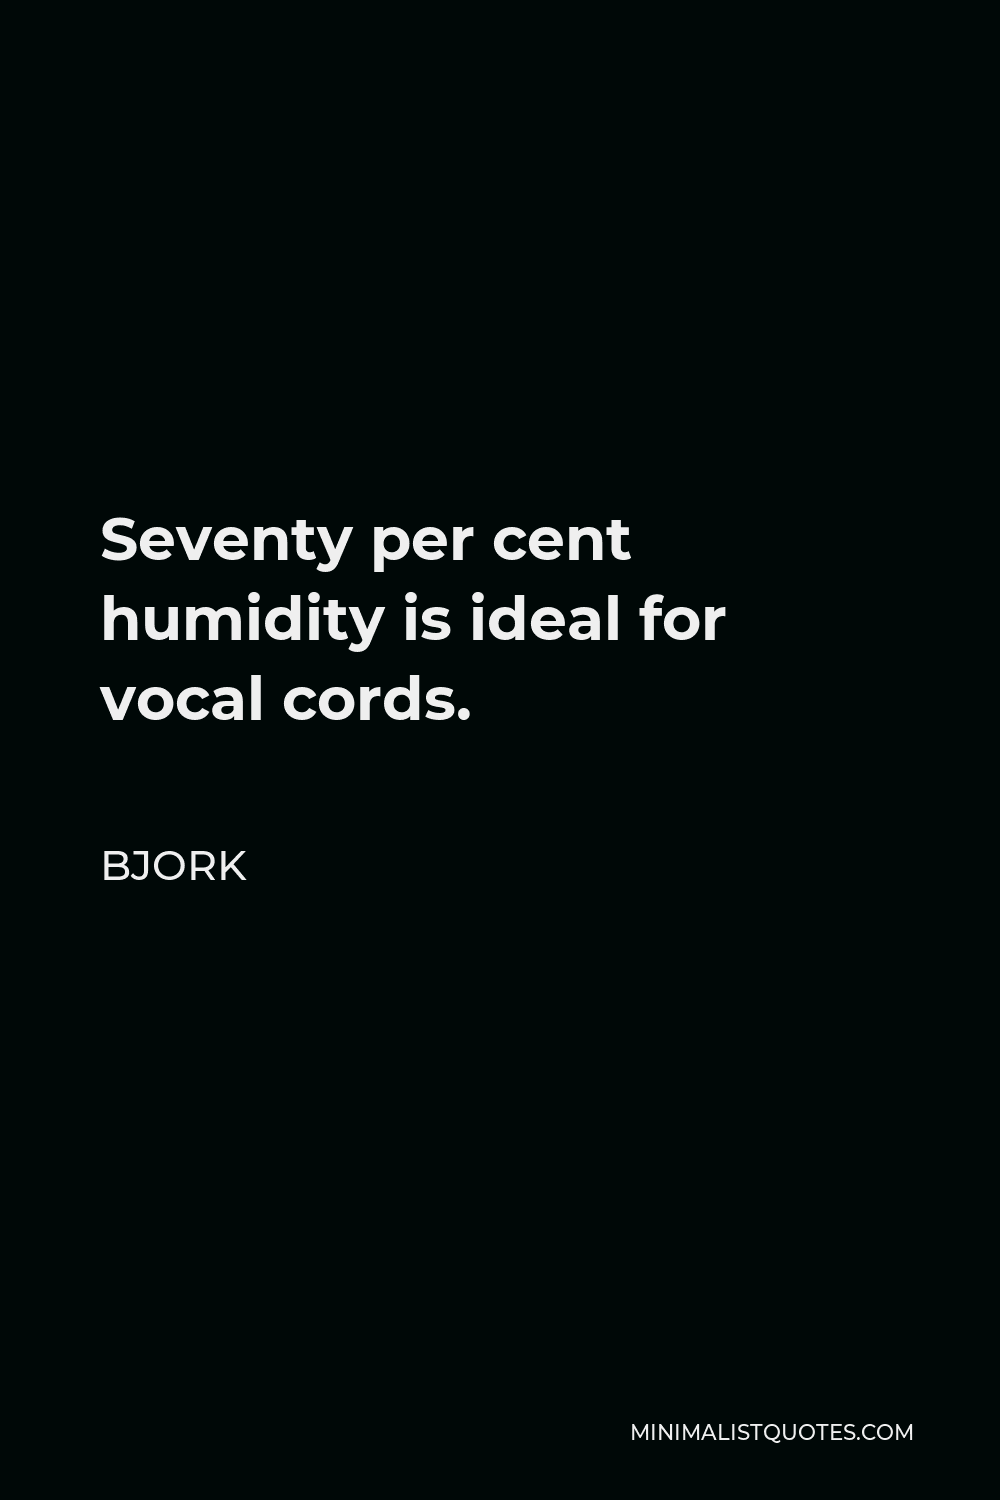 Bjork Quote - Seventy per cent humidity is ideal for vocal cords.